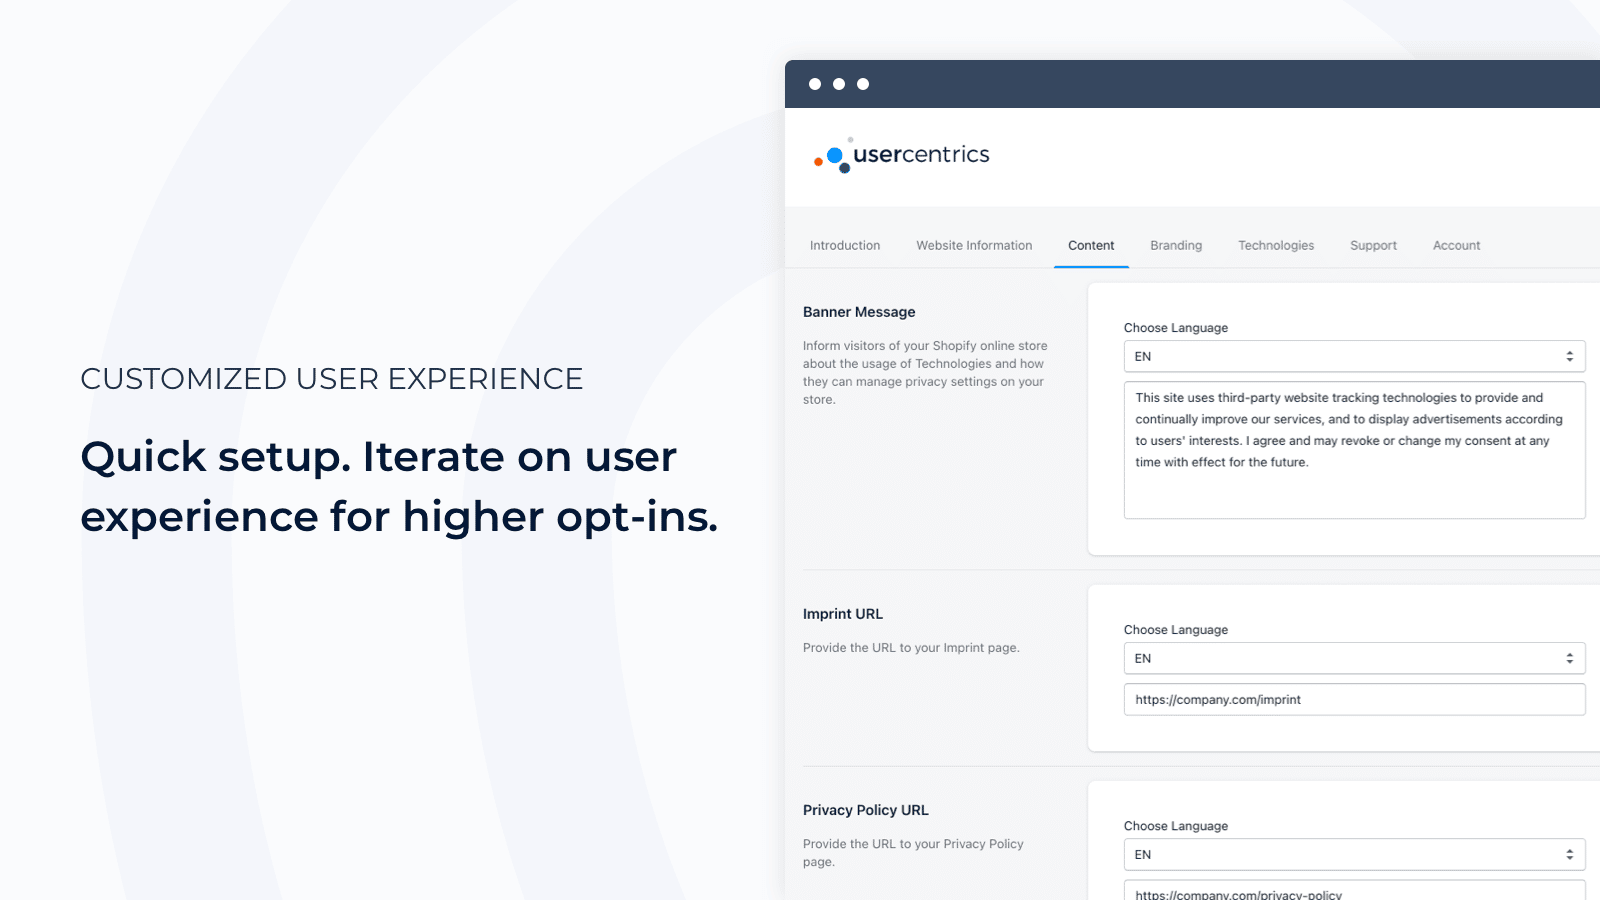 Cookie Manager by Usercentrics